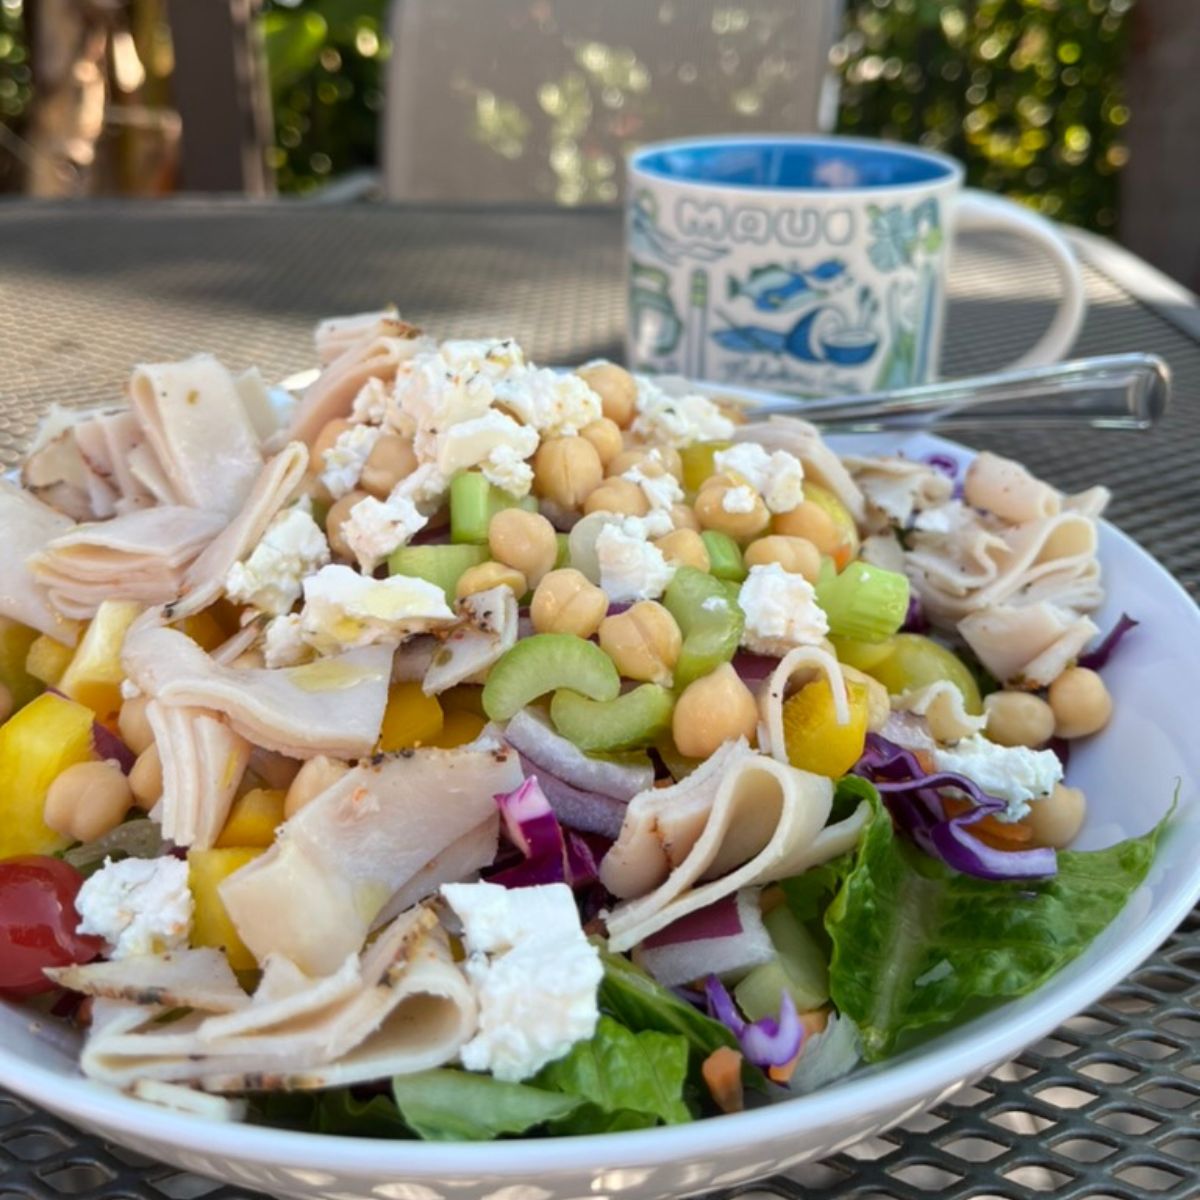 large bowl of salad on patio table with a maui mug in the background.